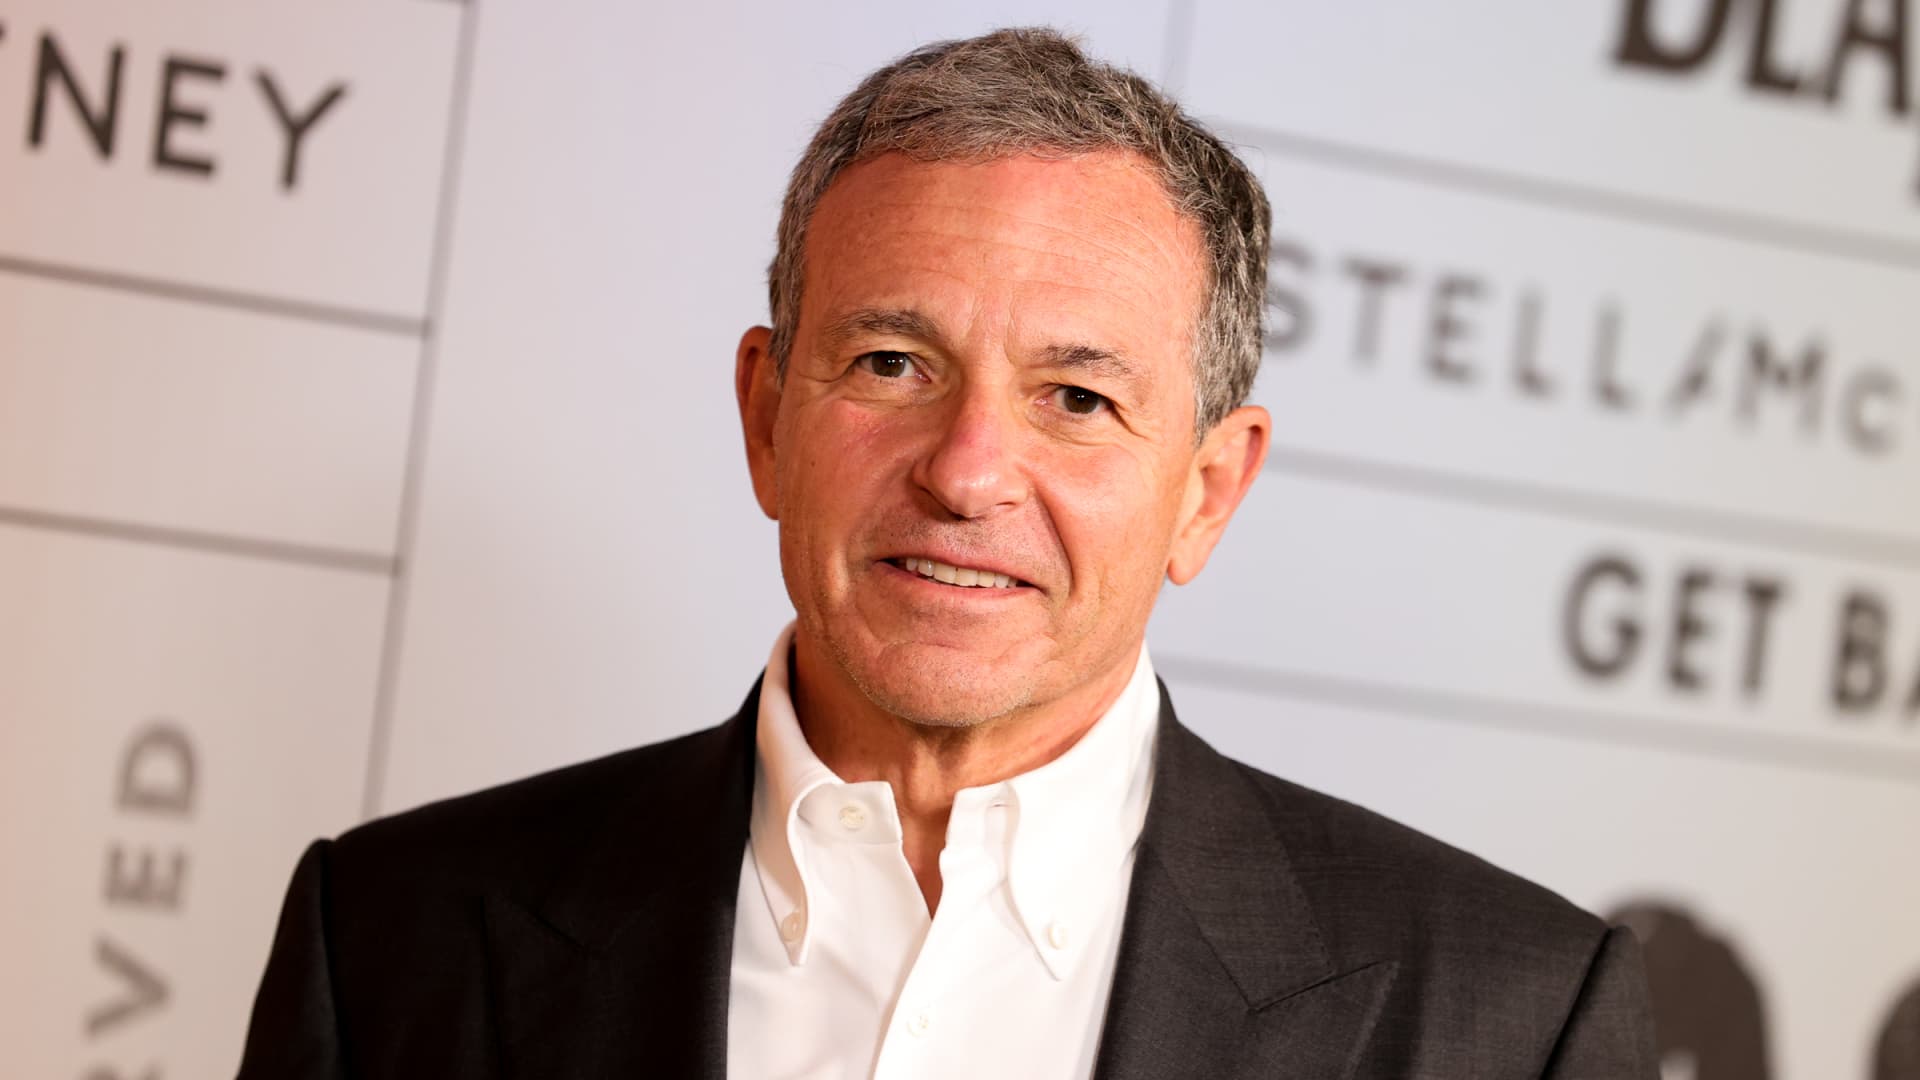 Moviegoing won't return to pre-pandemic levels, says Disney's Bob Iger